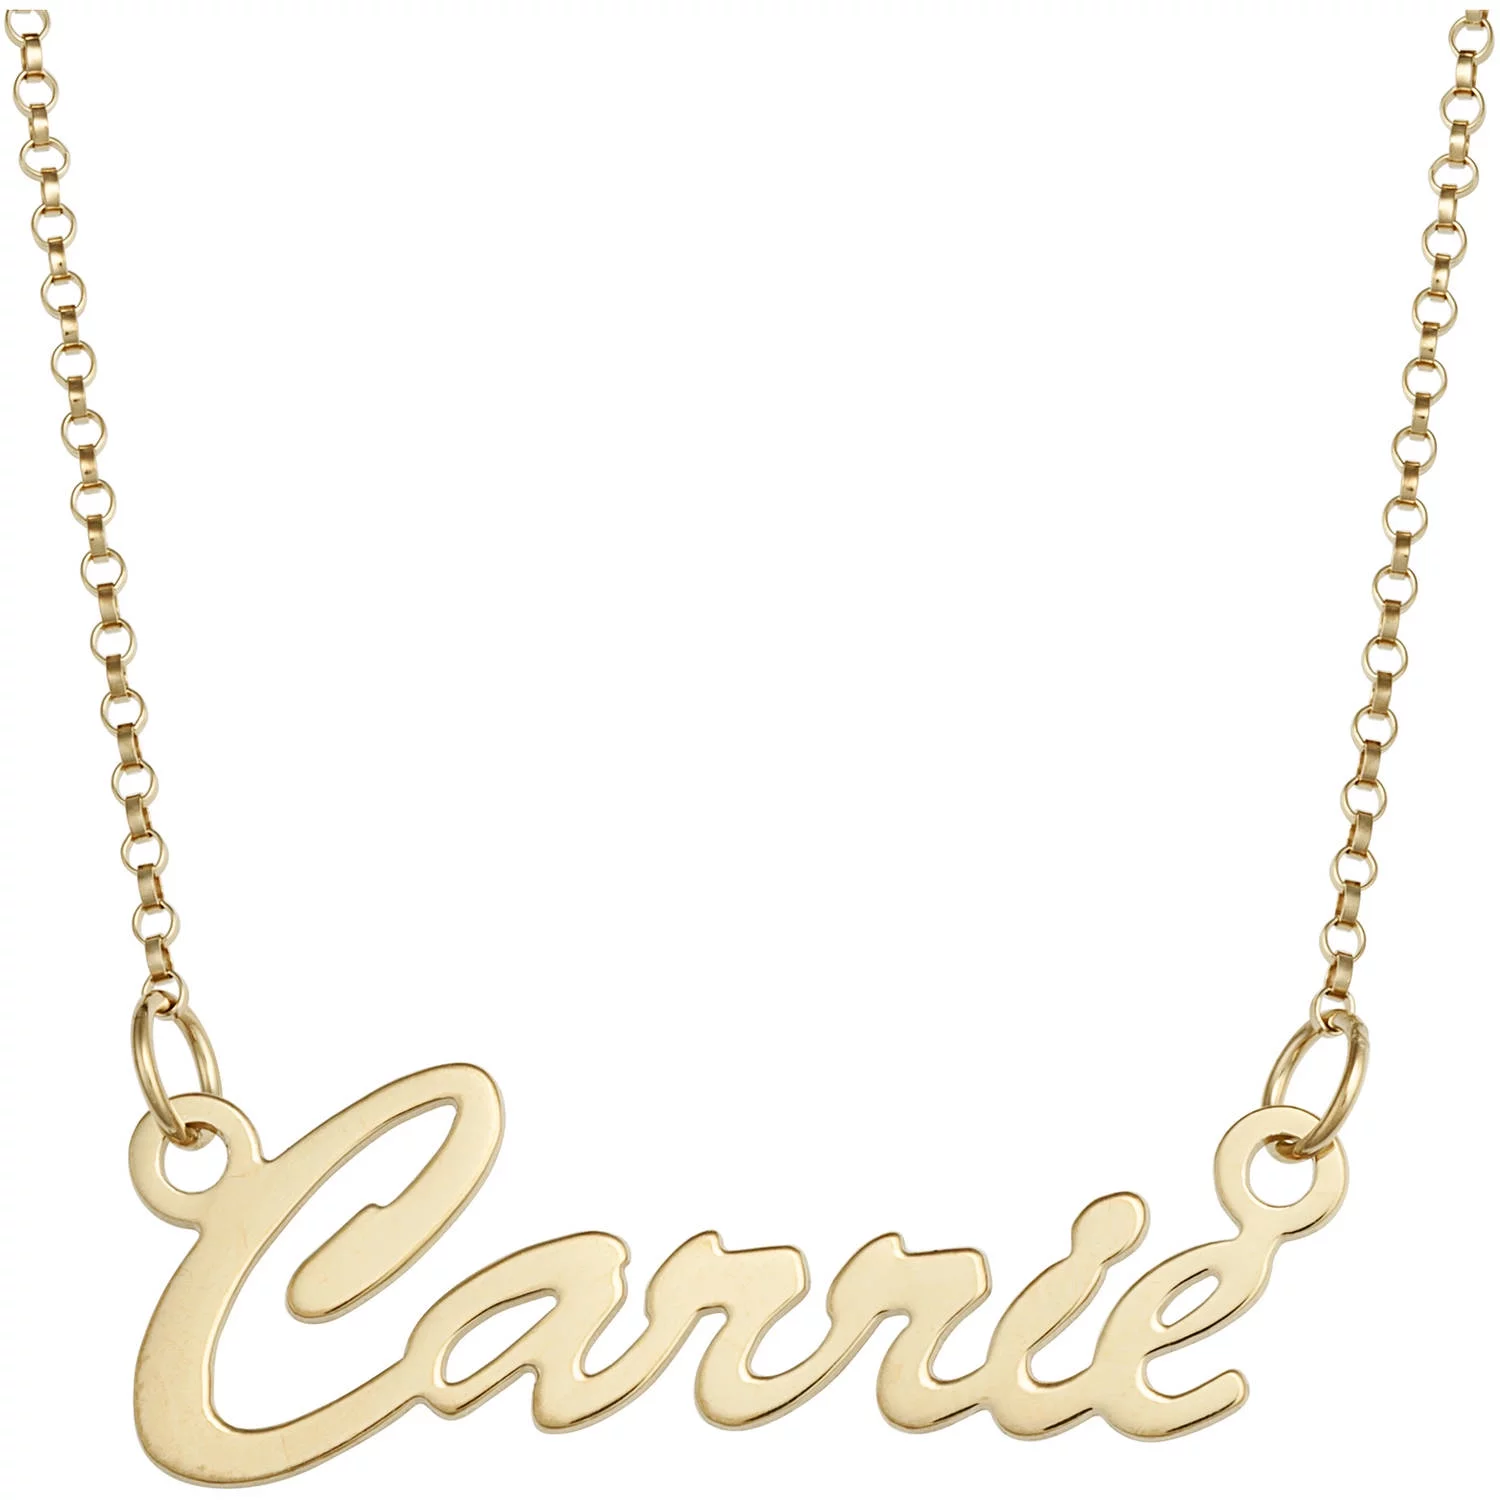 Personalized Planet Women's 14kt Gold-Plated Sterling Hollywood Nameplate Necklace,18"